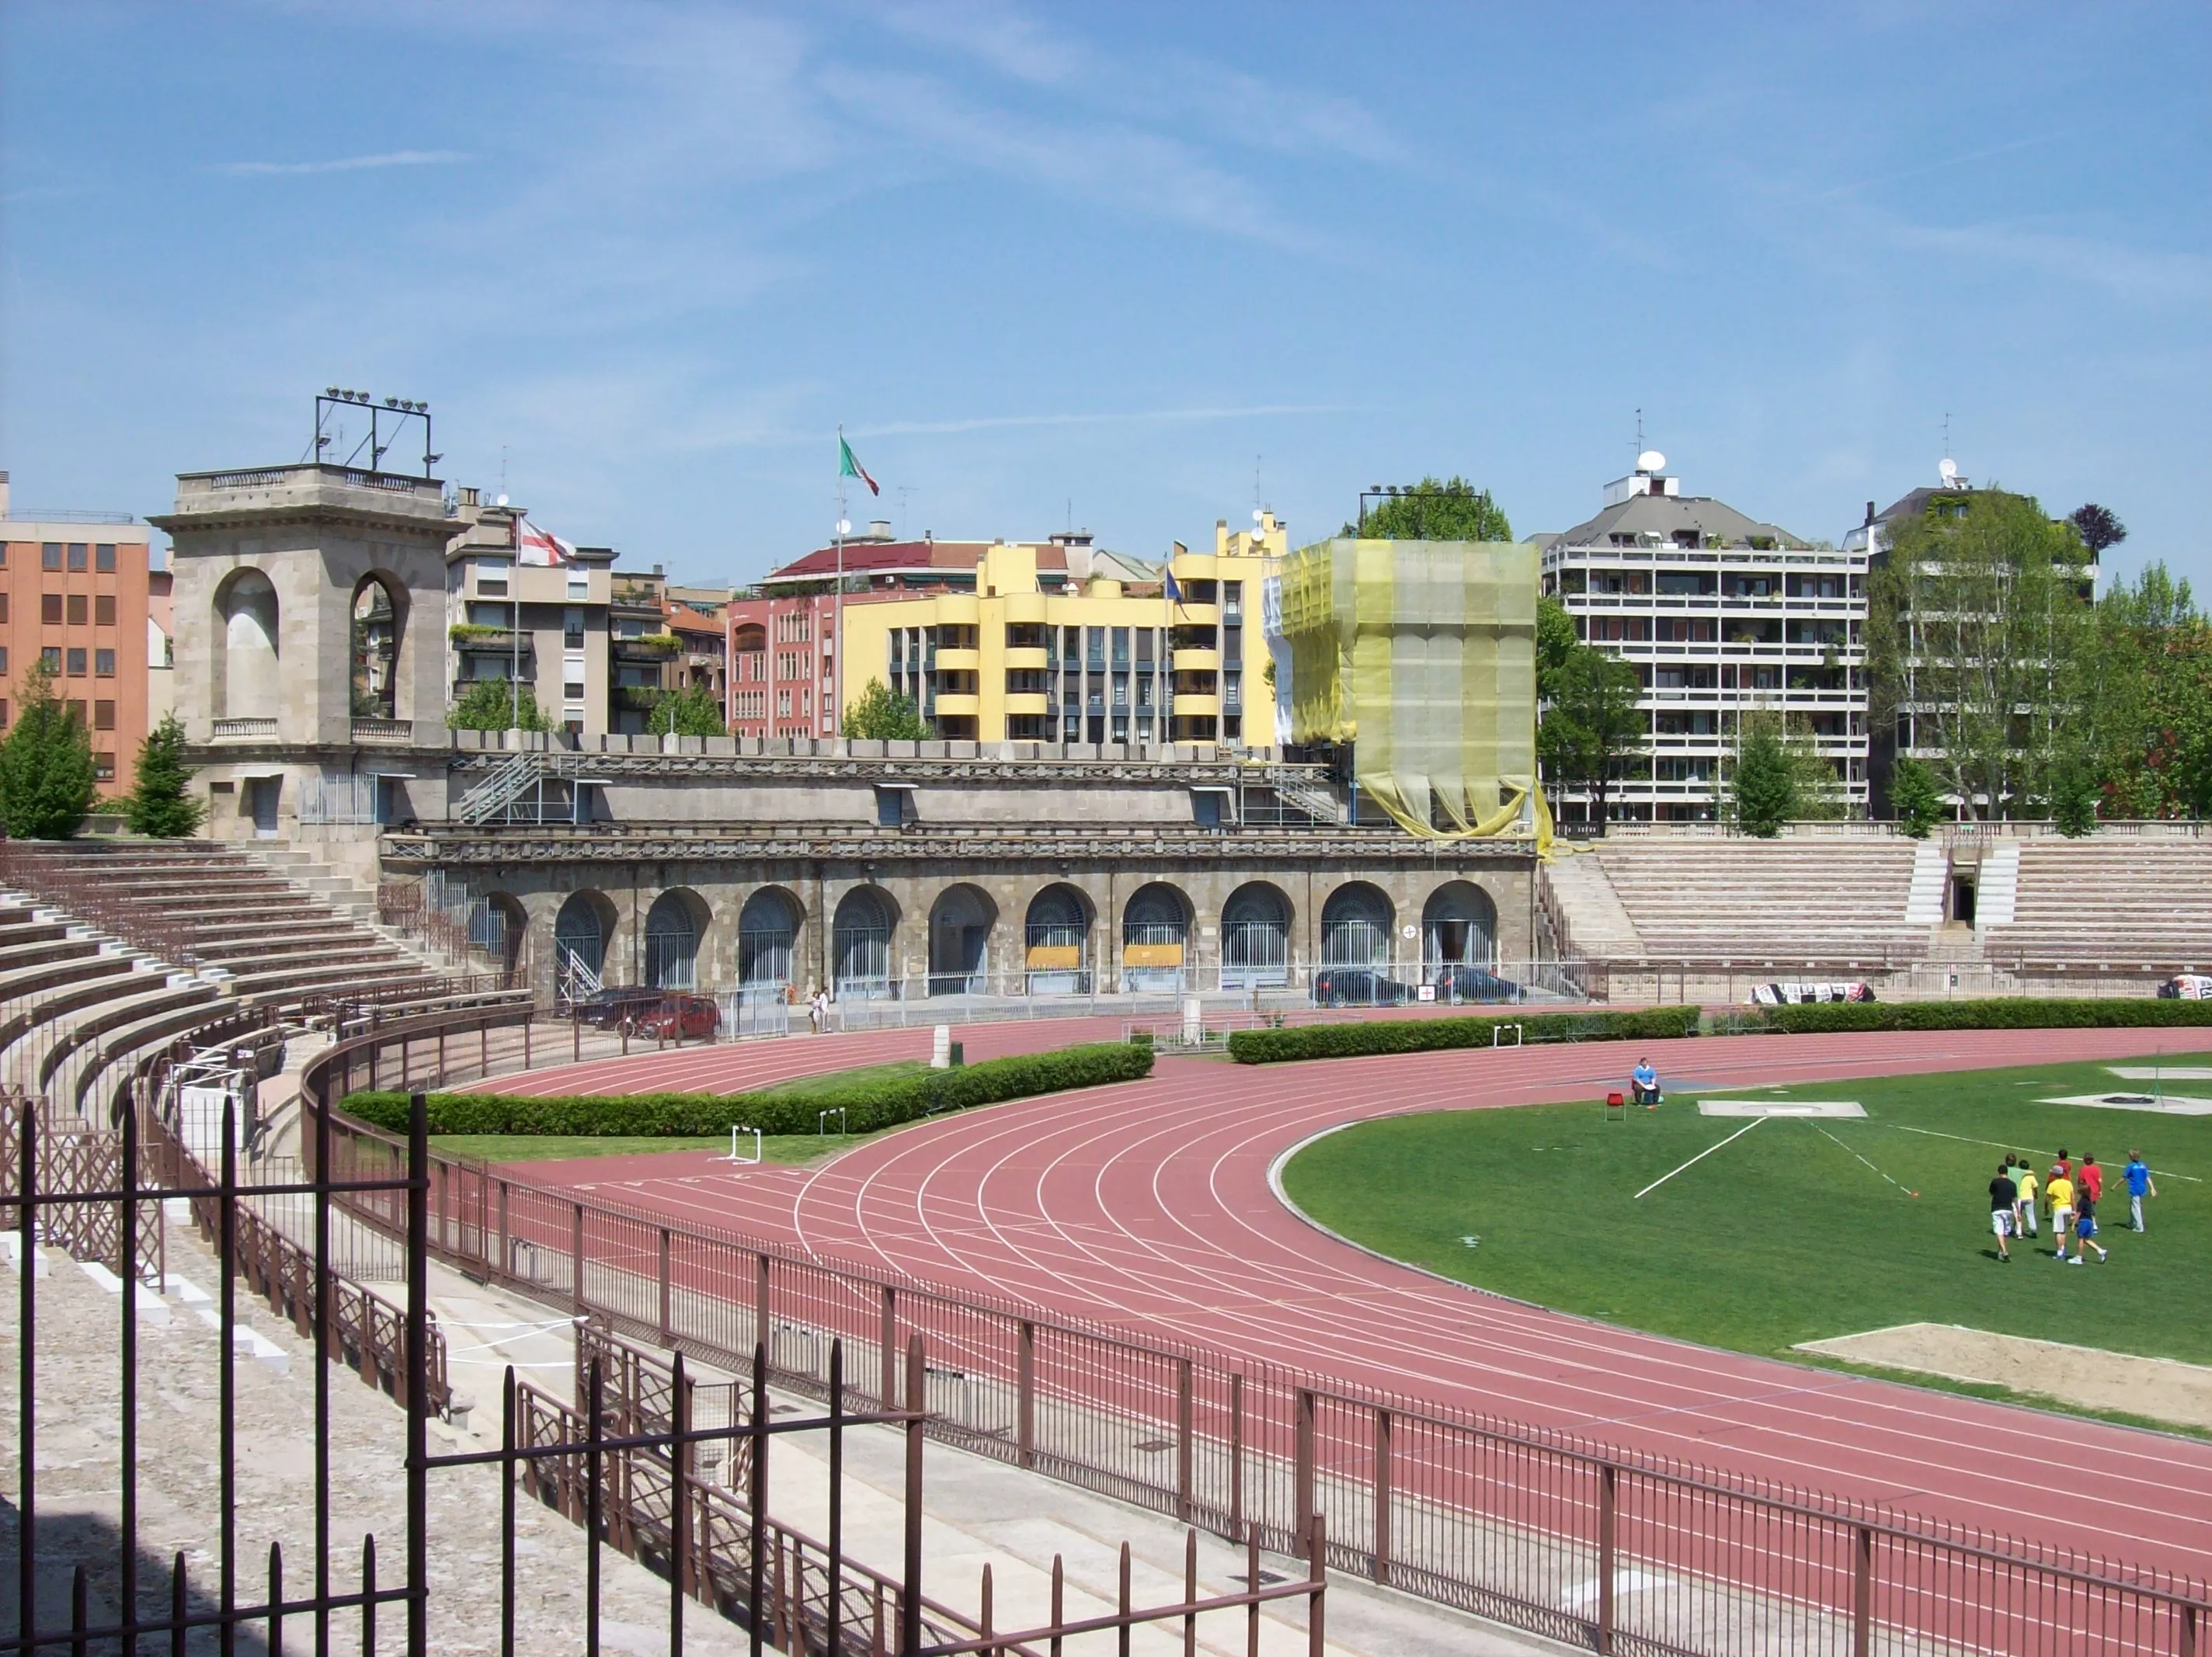 Arena Civica in Italy, Europe | Museums - Rated 3.5